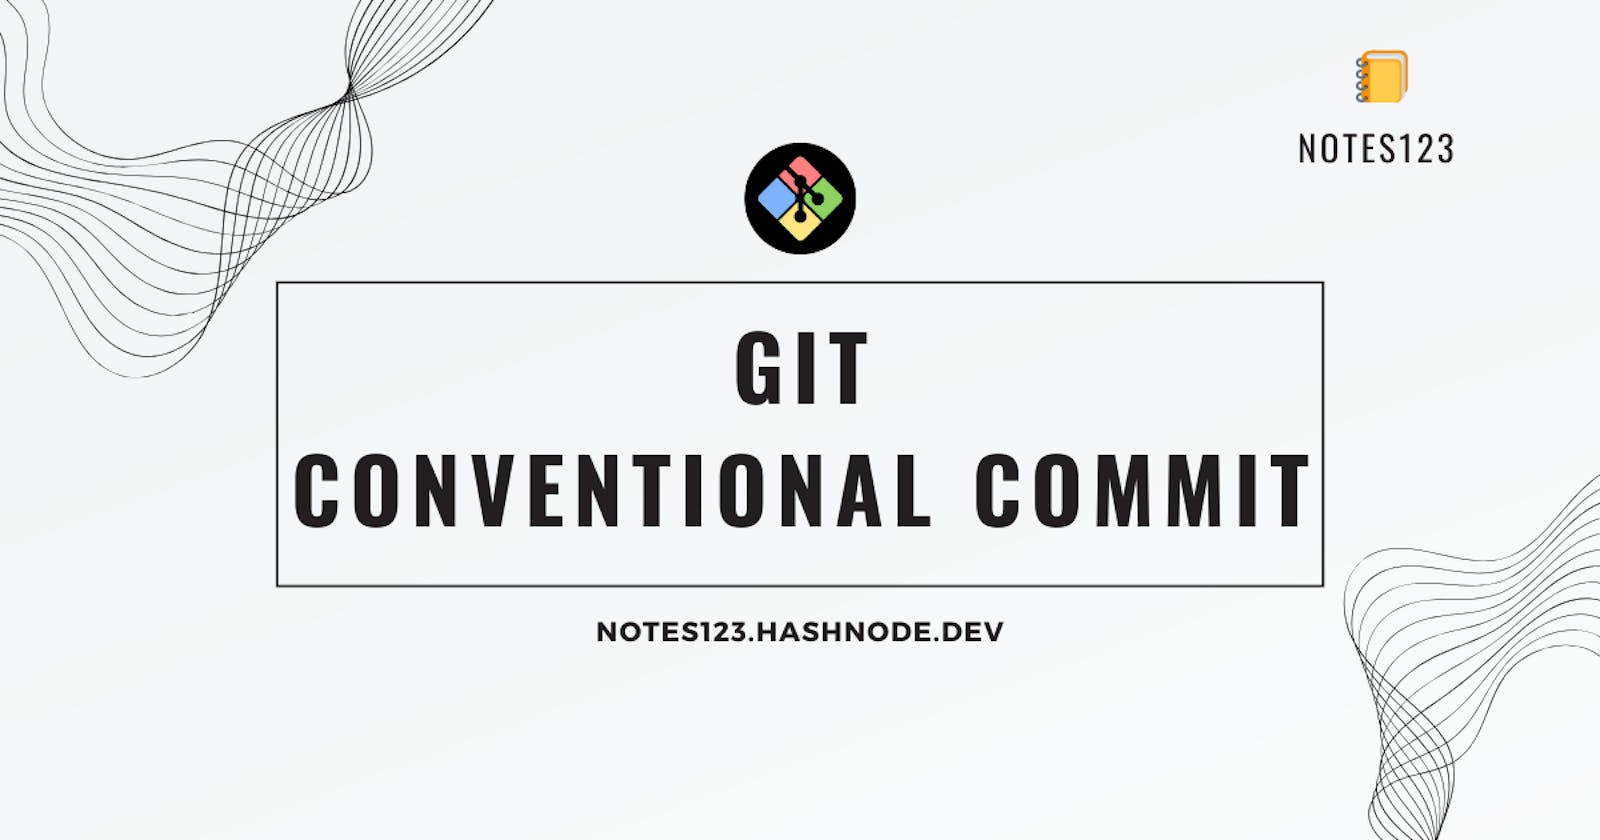 Git conventional commit